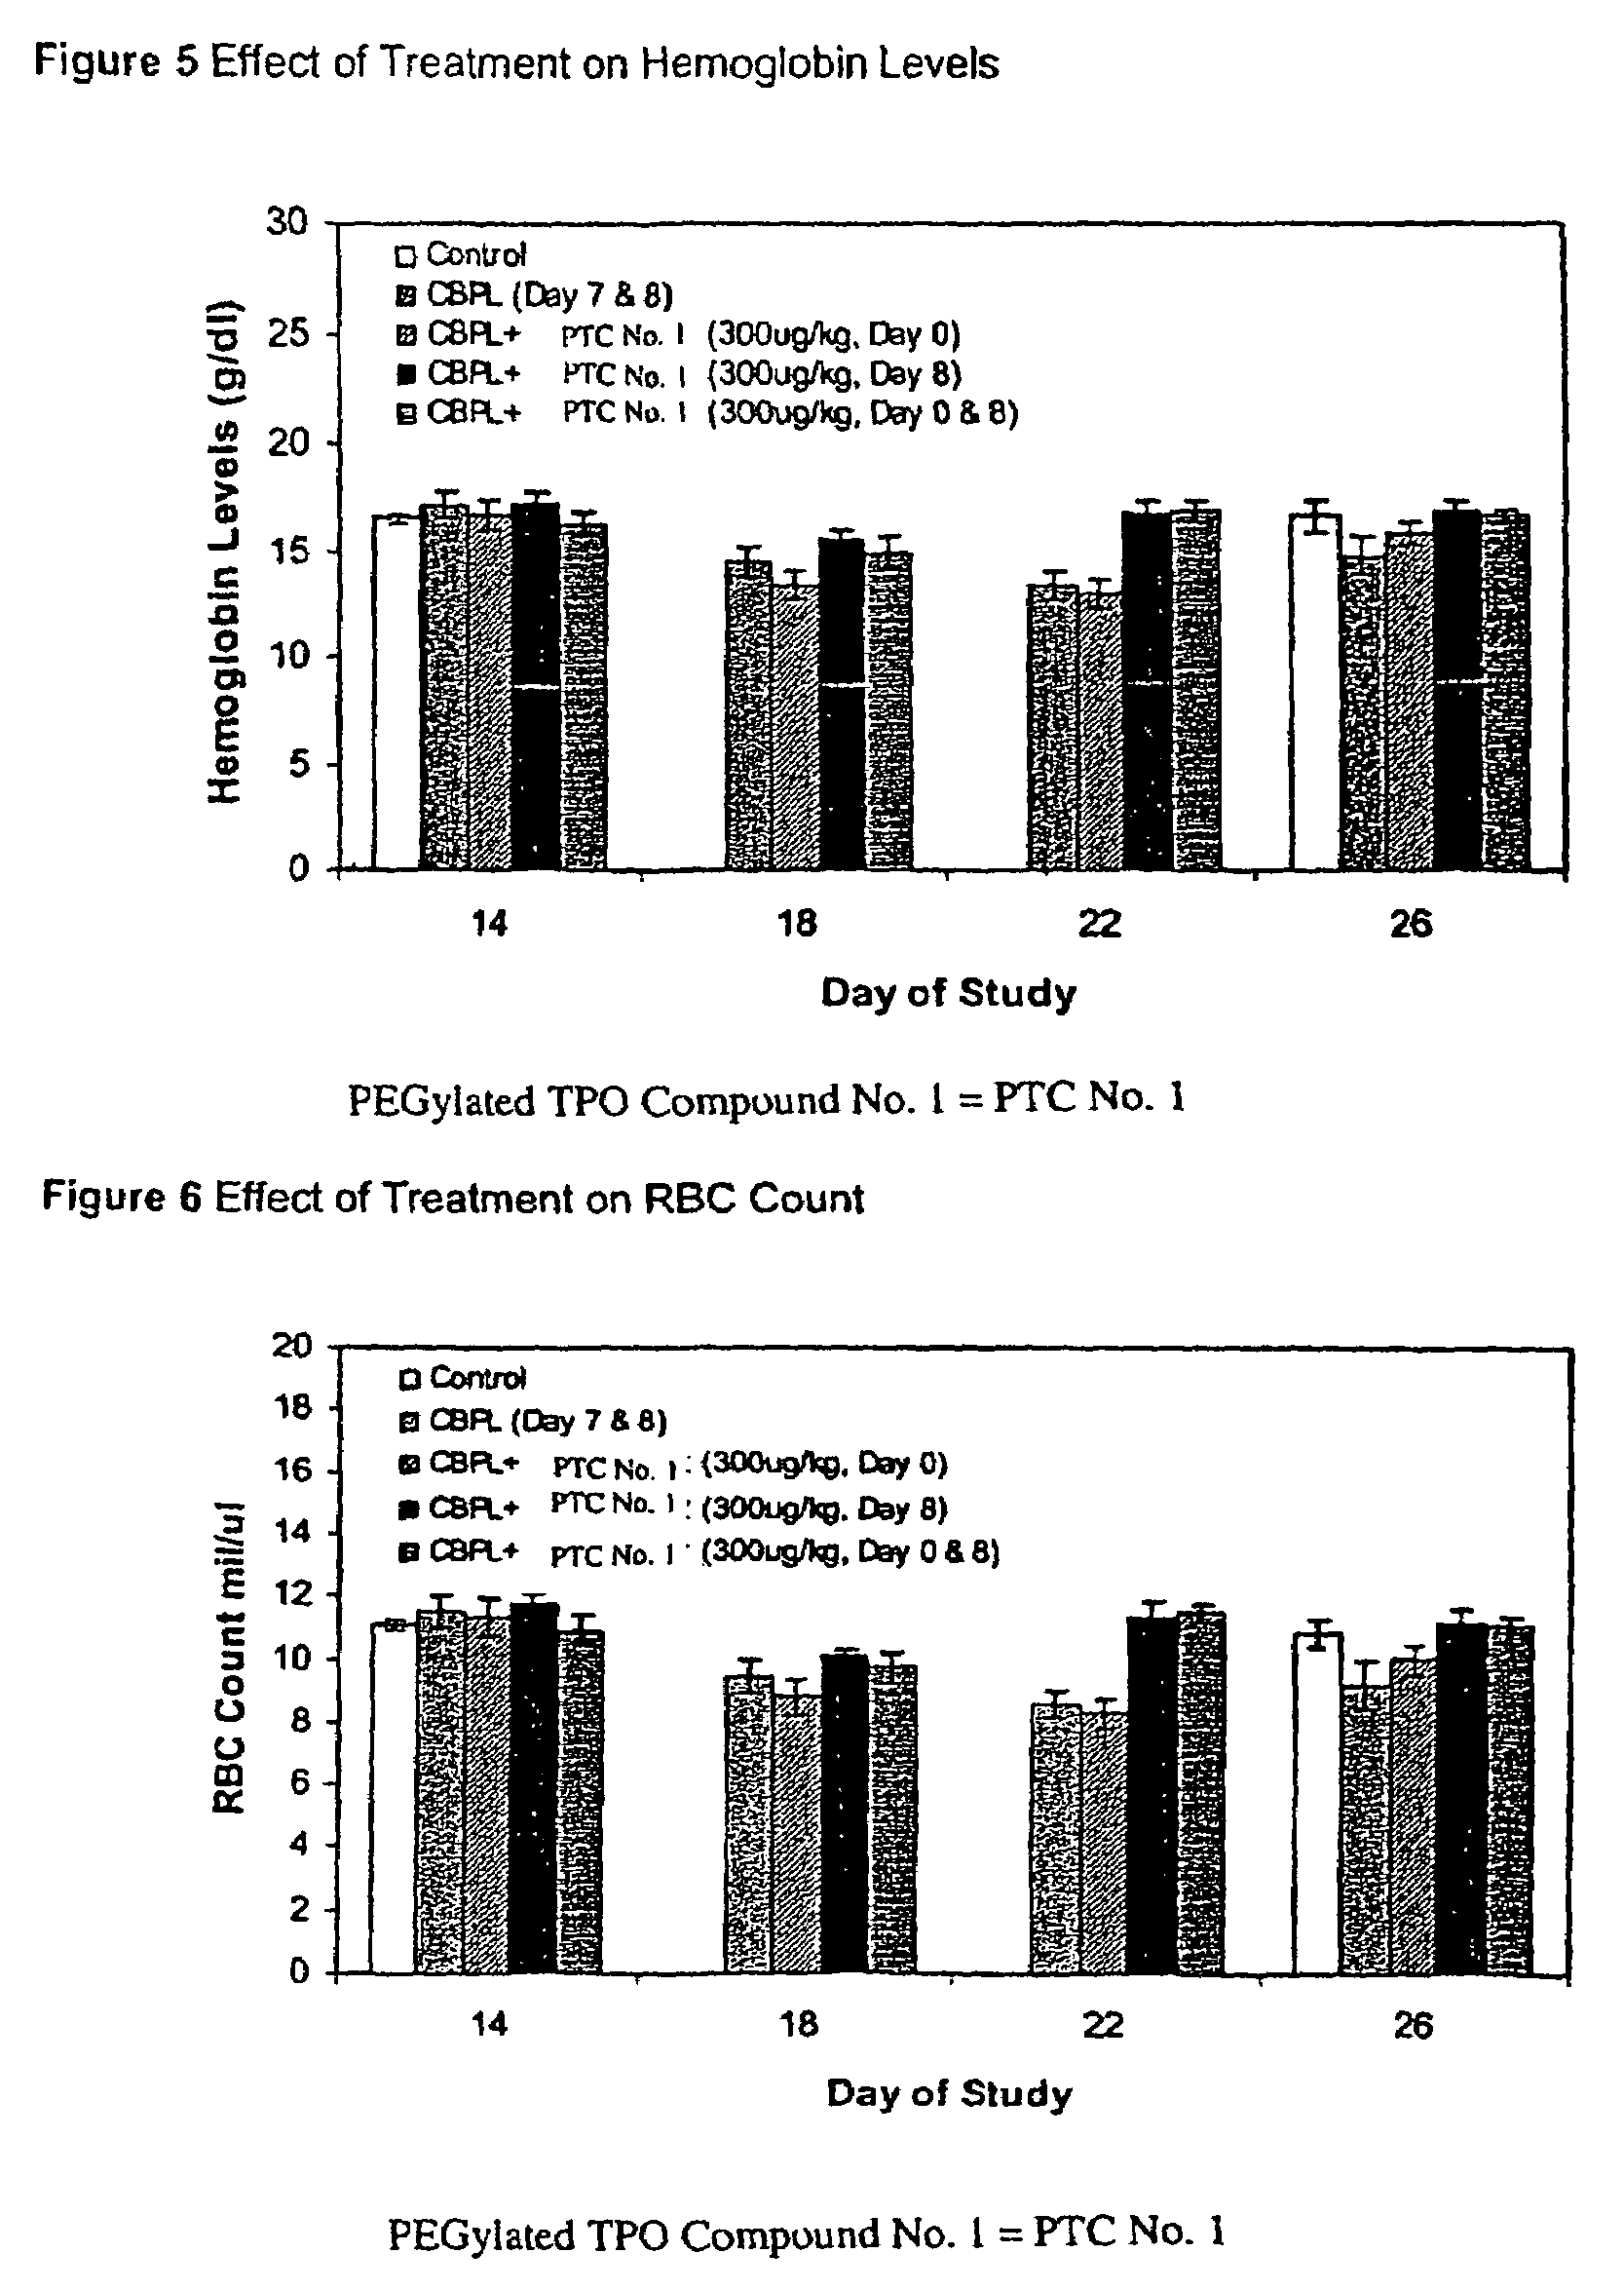 TPO peptide compounds for treatment of anemia